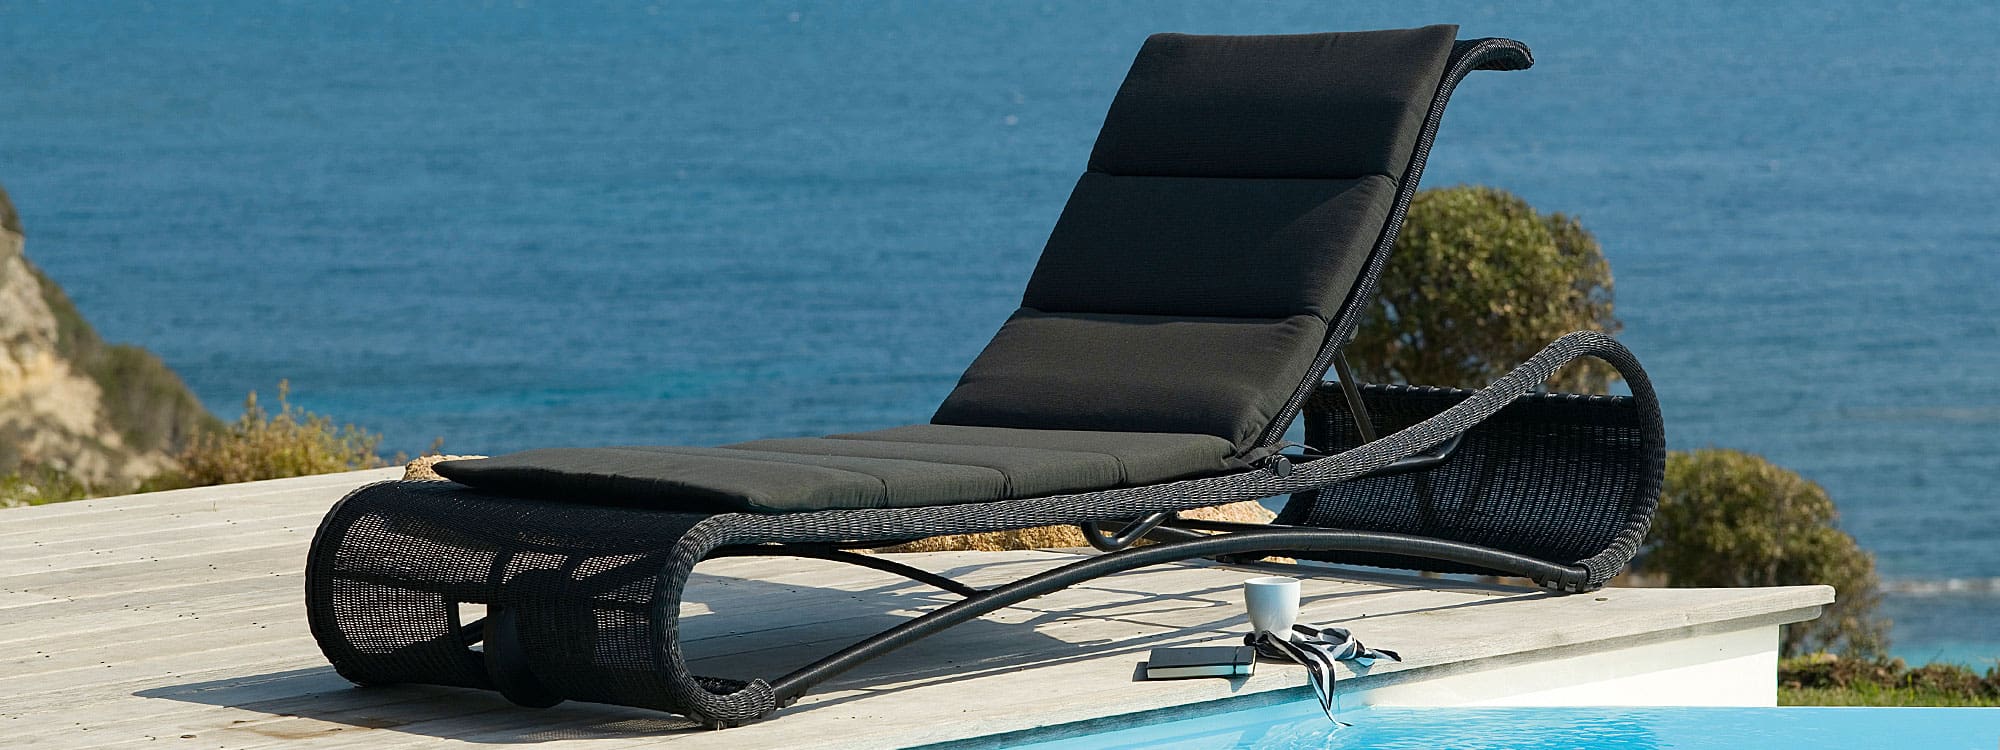 Image of black rattan Escape sun lounger with black cushion by Cane-line, on poolside with sea in the background